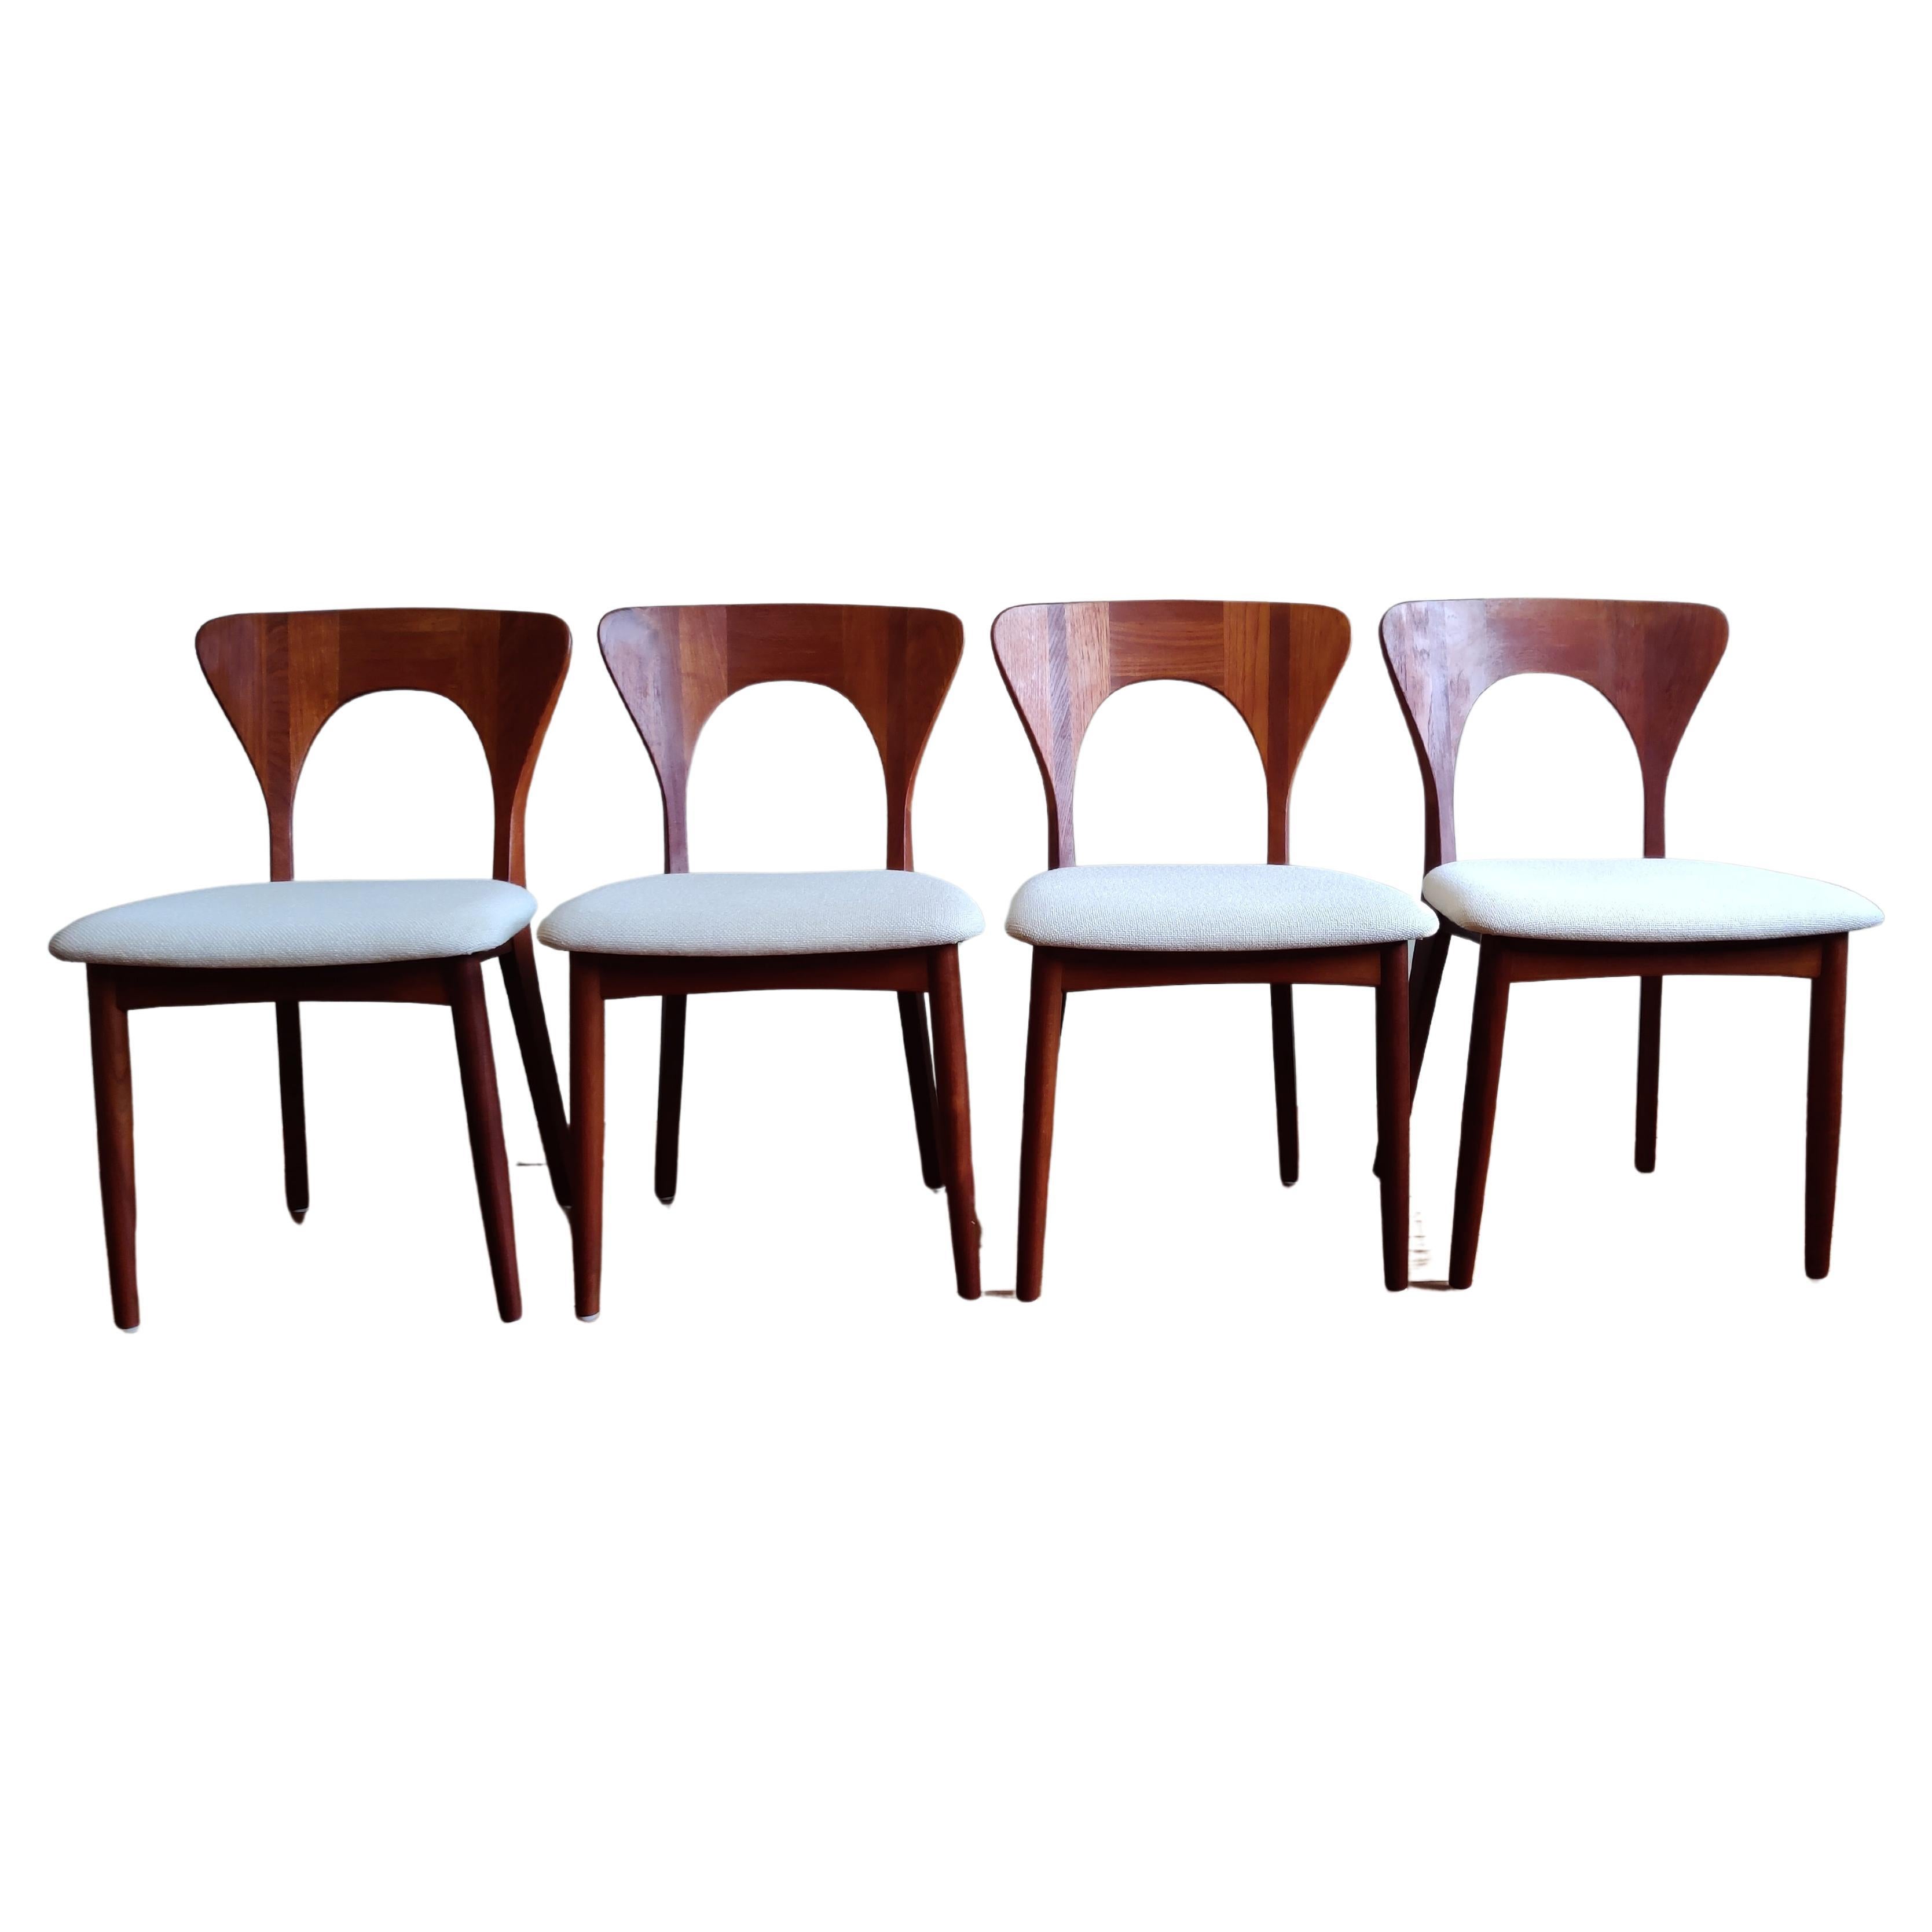 Danish dining chairs "Peter" by Niels Koefoed for Koefoeds Hornslet, Set of 4 For Sale